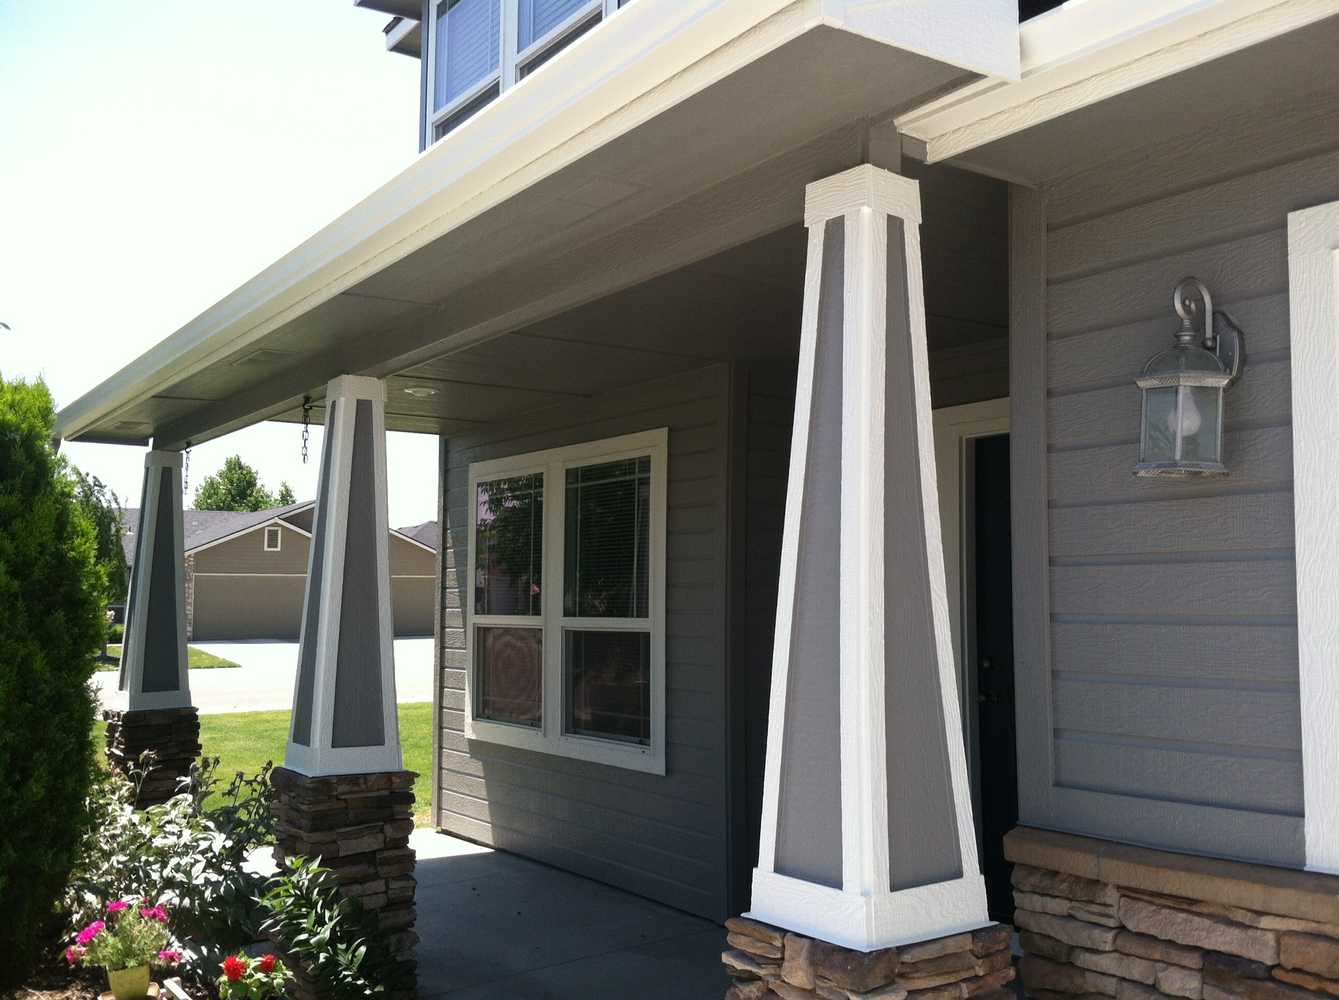 Rocky Mountain Painting Contractors 